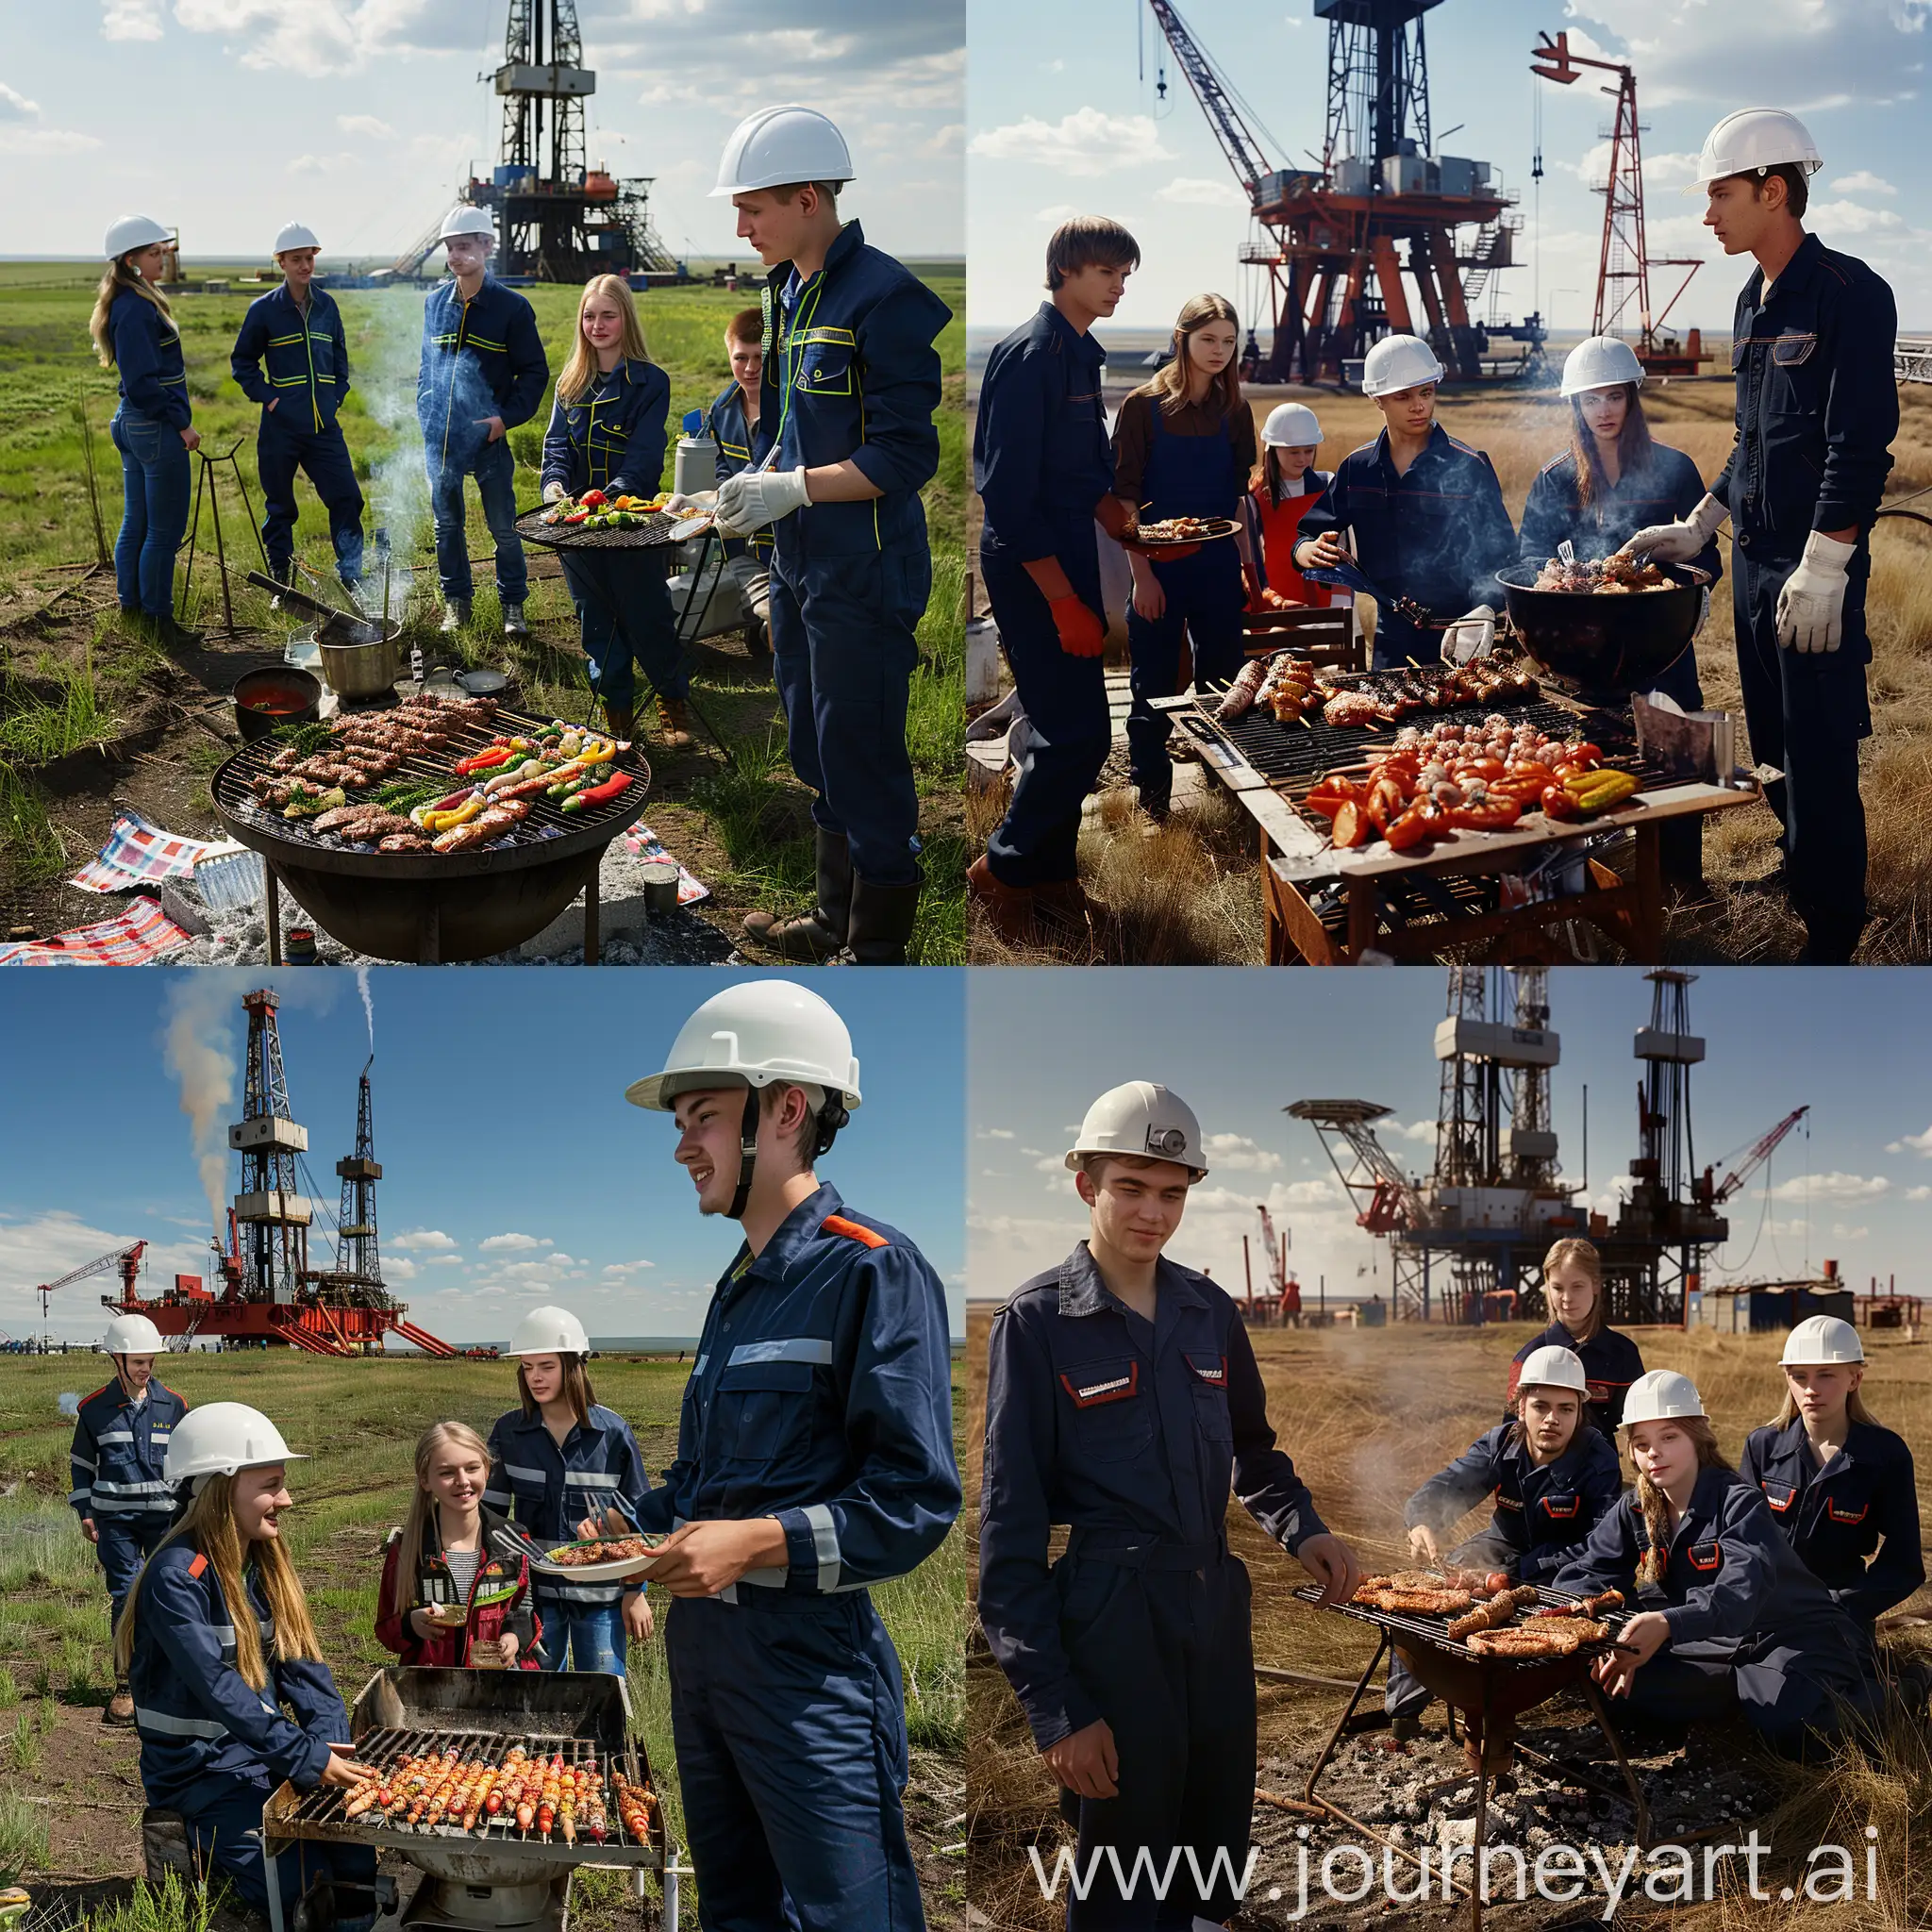 hyperrealistic high-quality image of  young youth students oil workers in dark blue professional uniform and white safety helmets having a barbecue picnic in a Russian steppe, with an oil rig in the background, no other people in the background, normal human faces, sunny weather